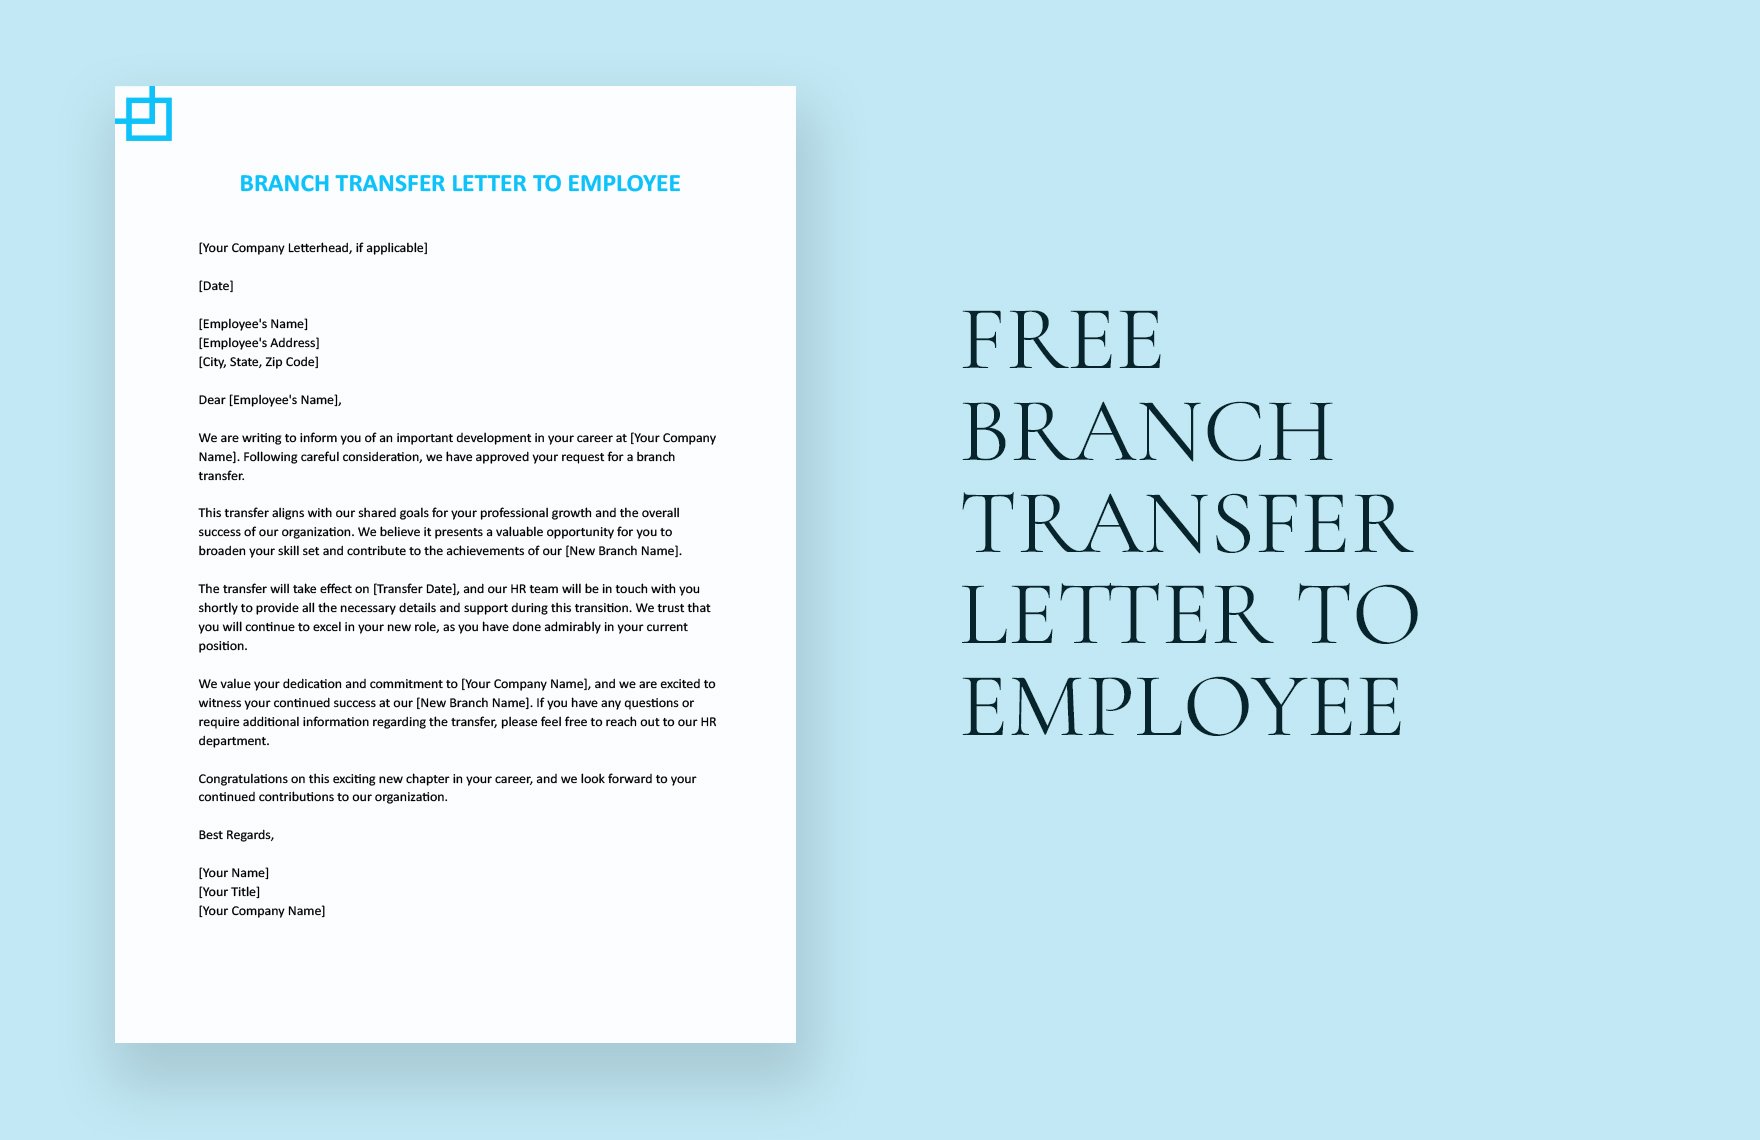 Branch Transfer Letter To Employee in Word, Google Docs